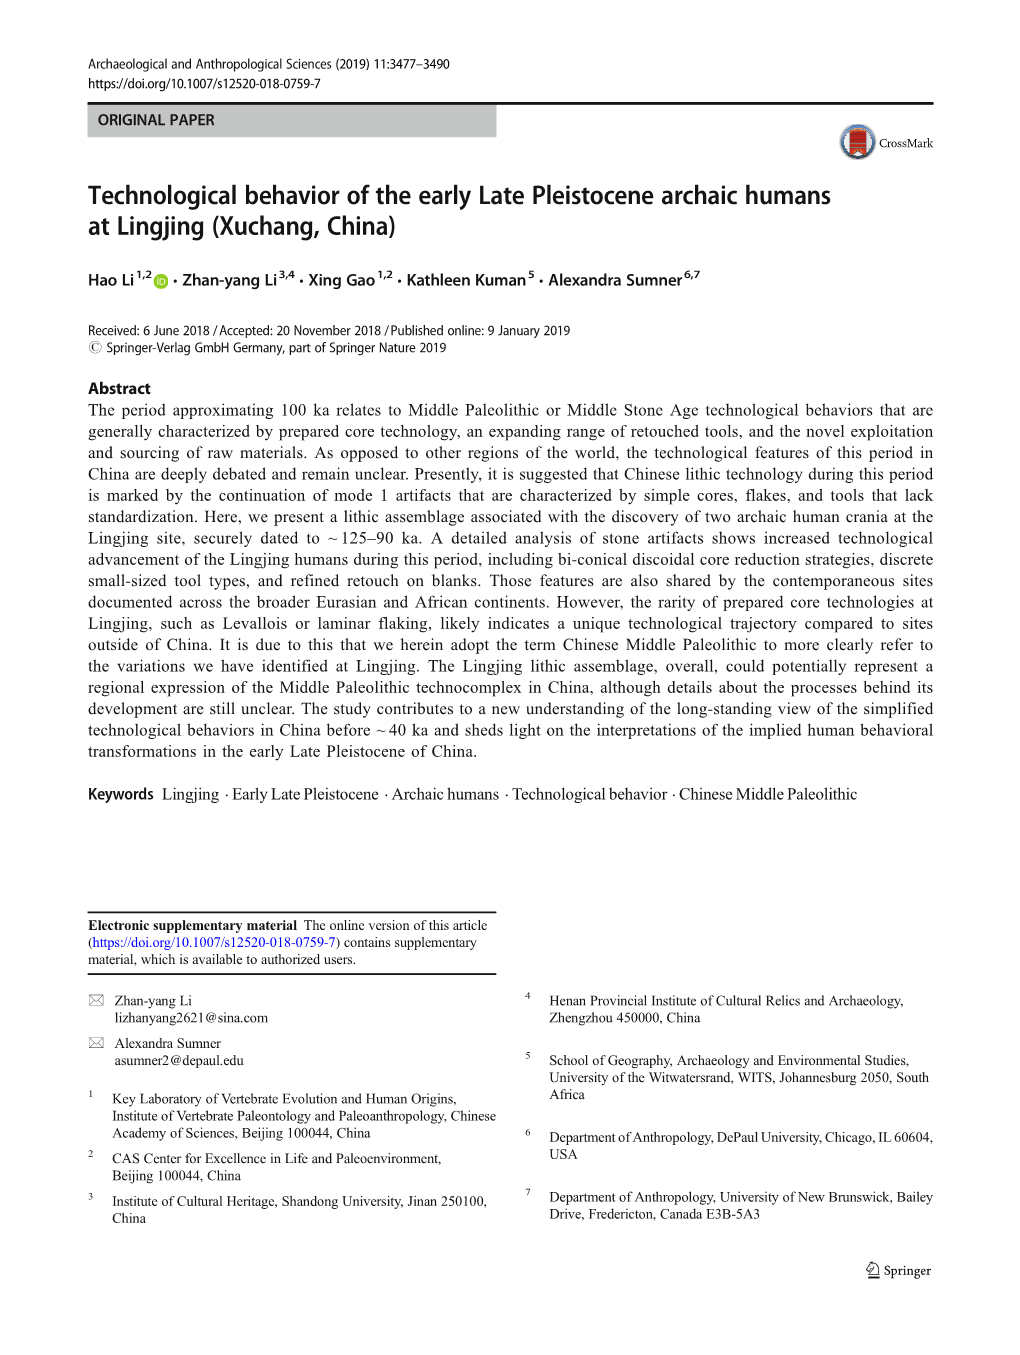 Technological Behavior of the Early Late Pleistocene Archaic Humans at Lingjing (Xuchang, China)